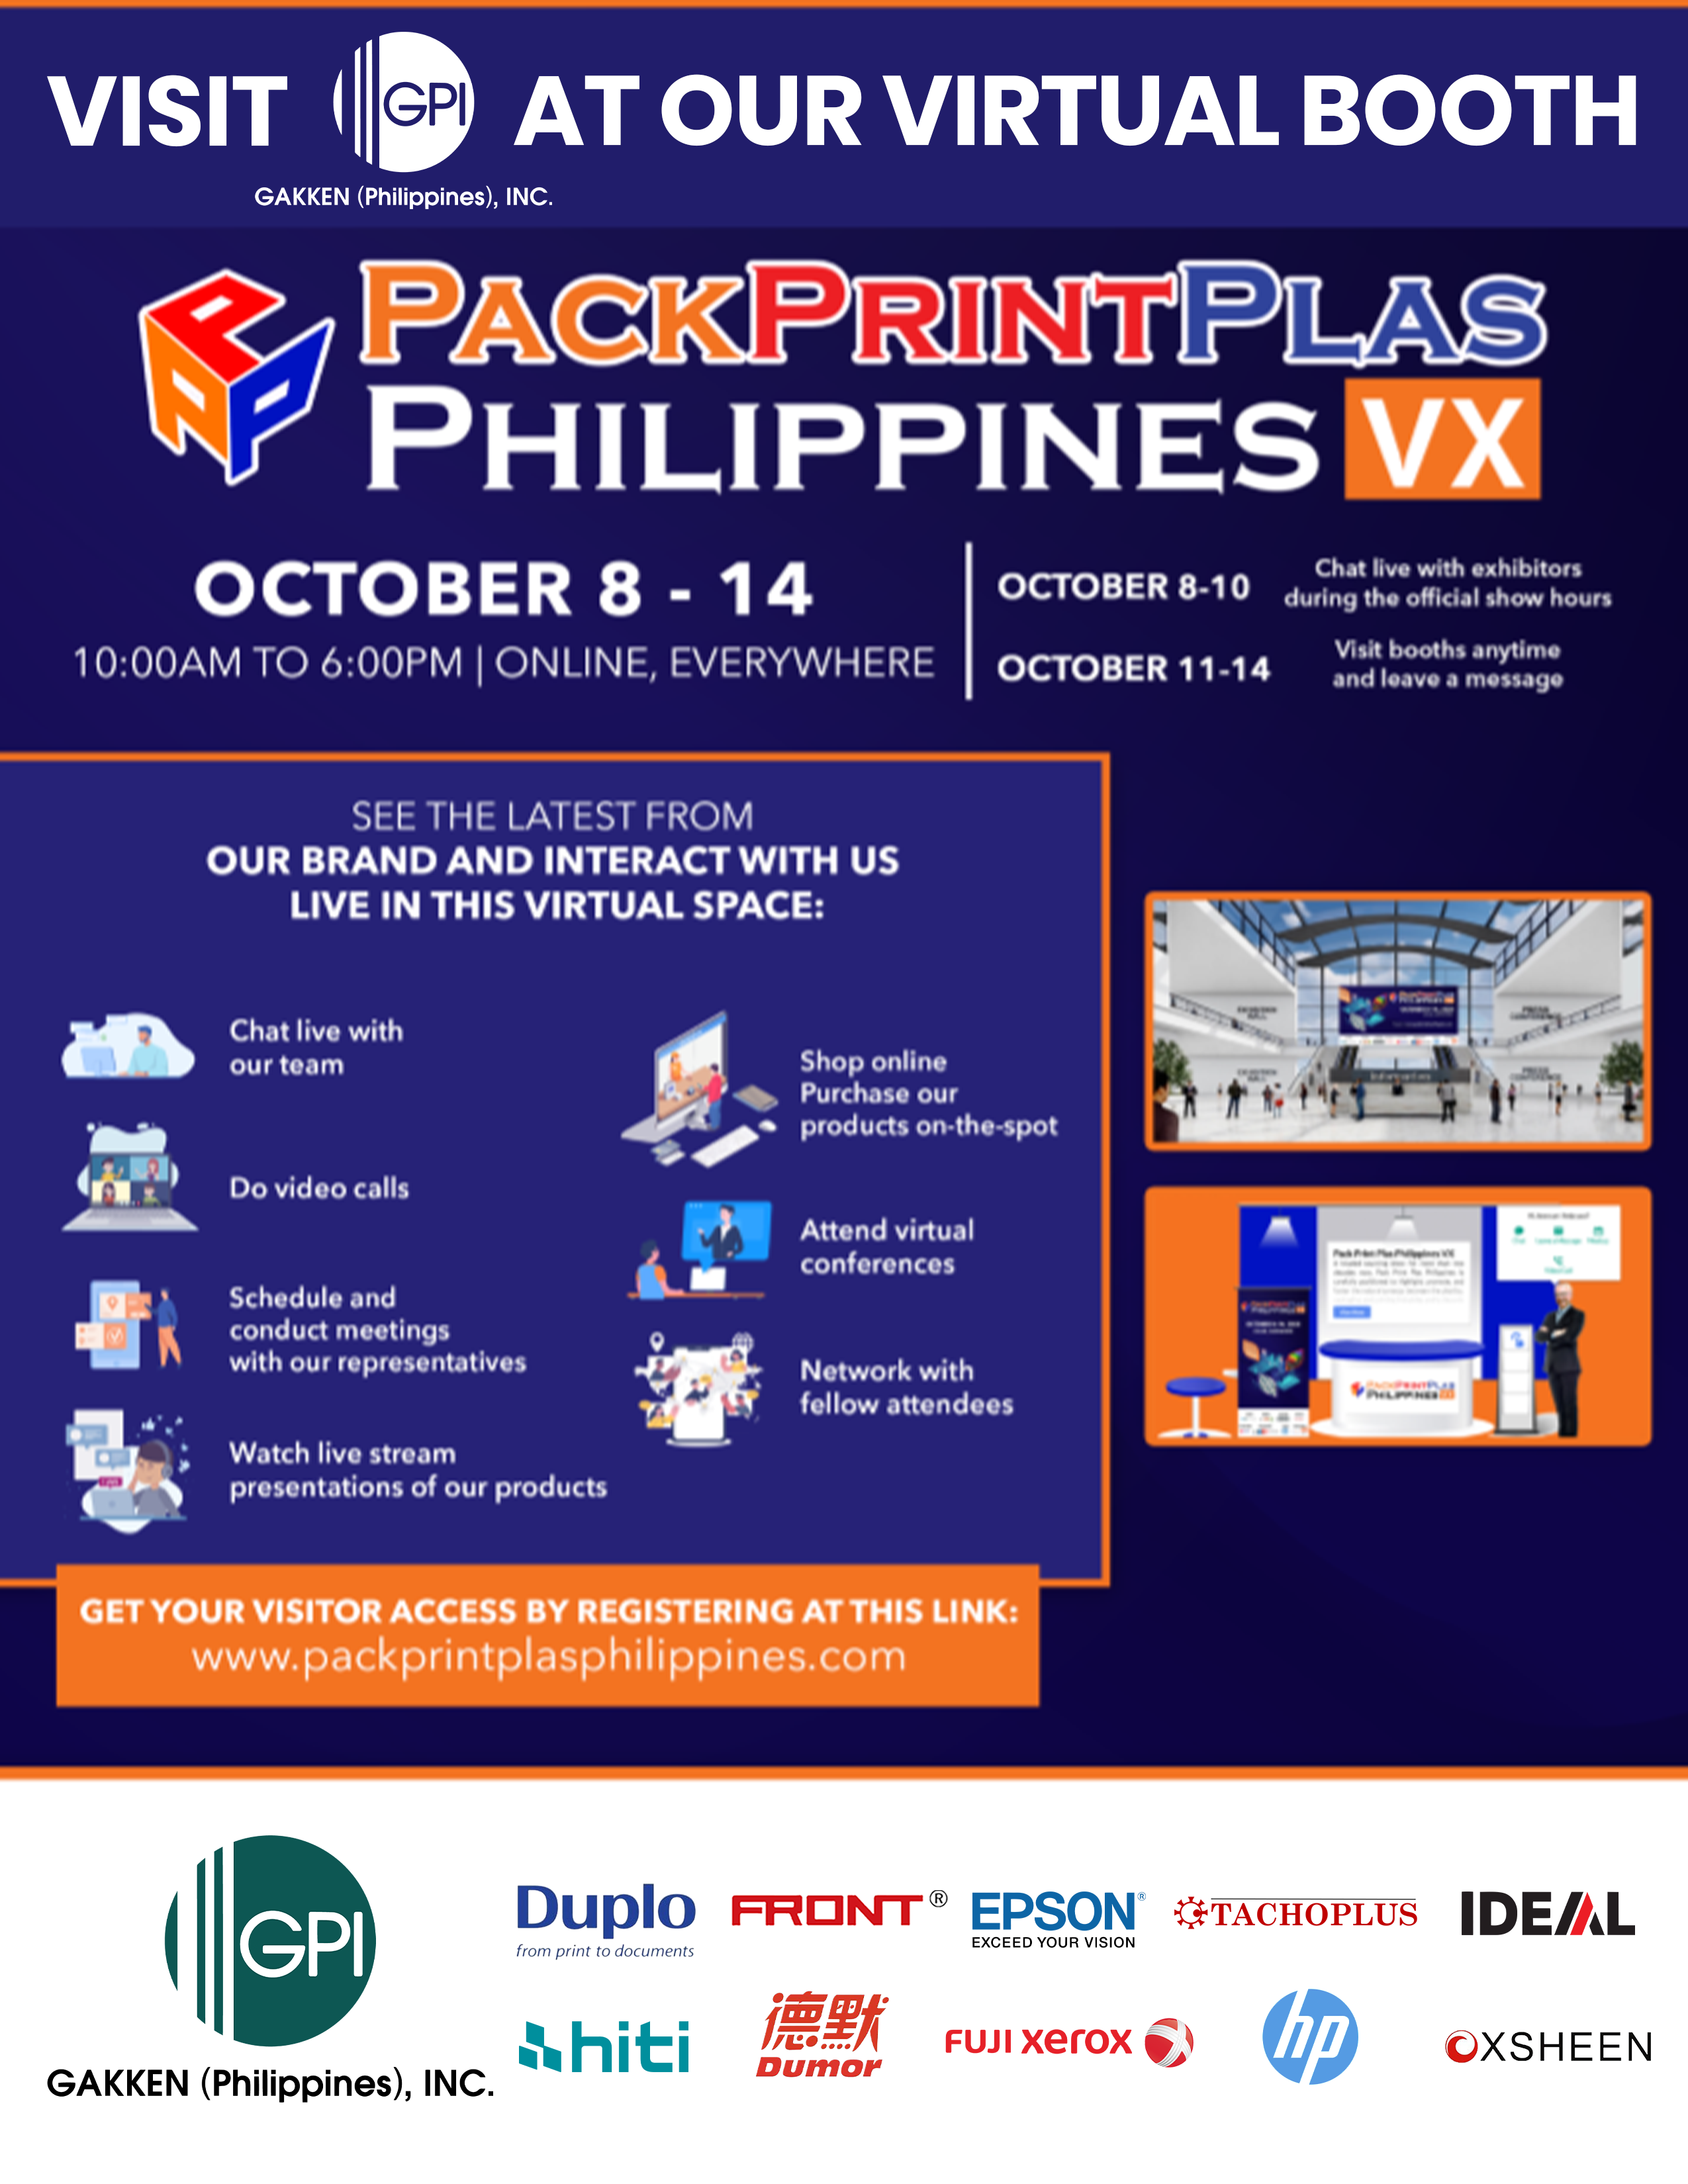 GPI Participates In Pack Print Plas Philippines VX 2020 – The First Ever Virtual Exhibit In The Country!